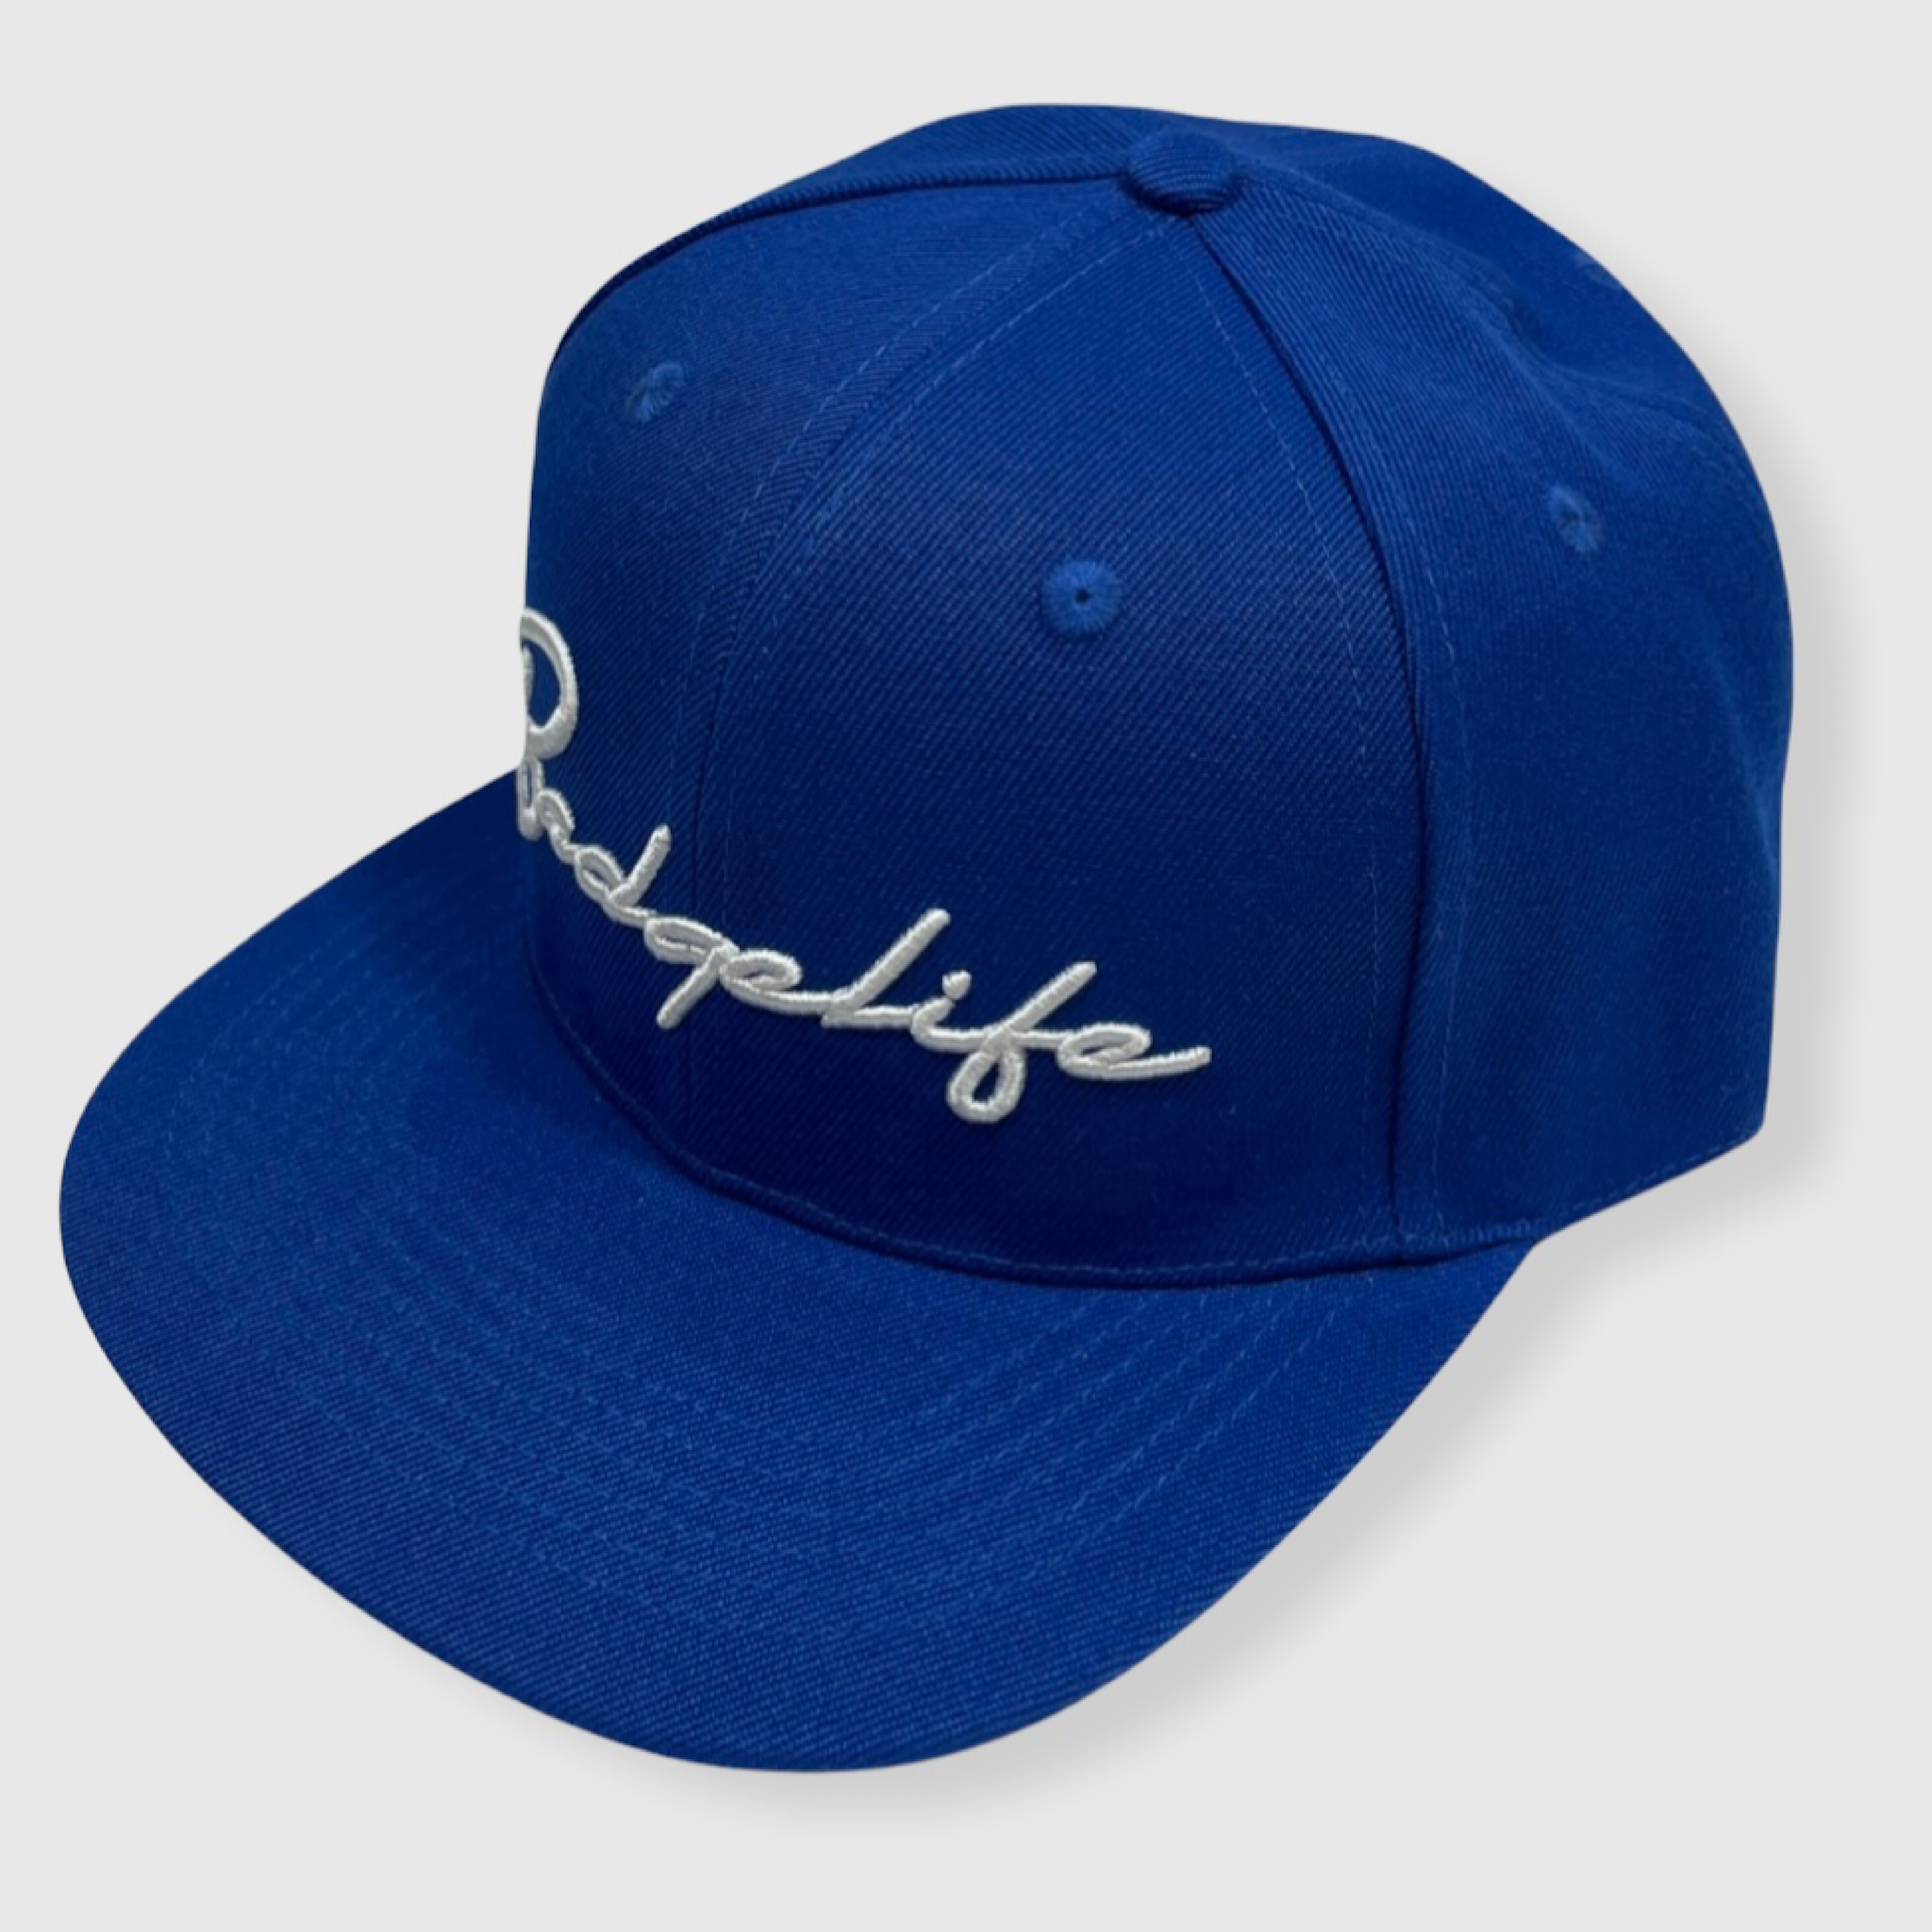 Hat Blue Clearance, SAVE 55% 